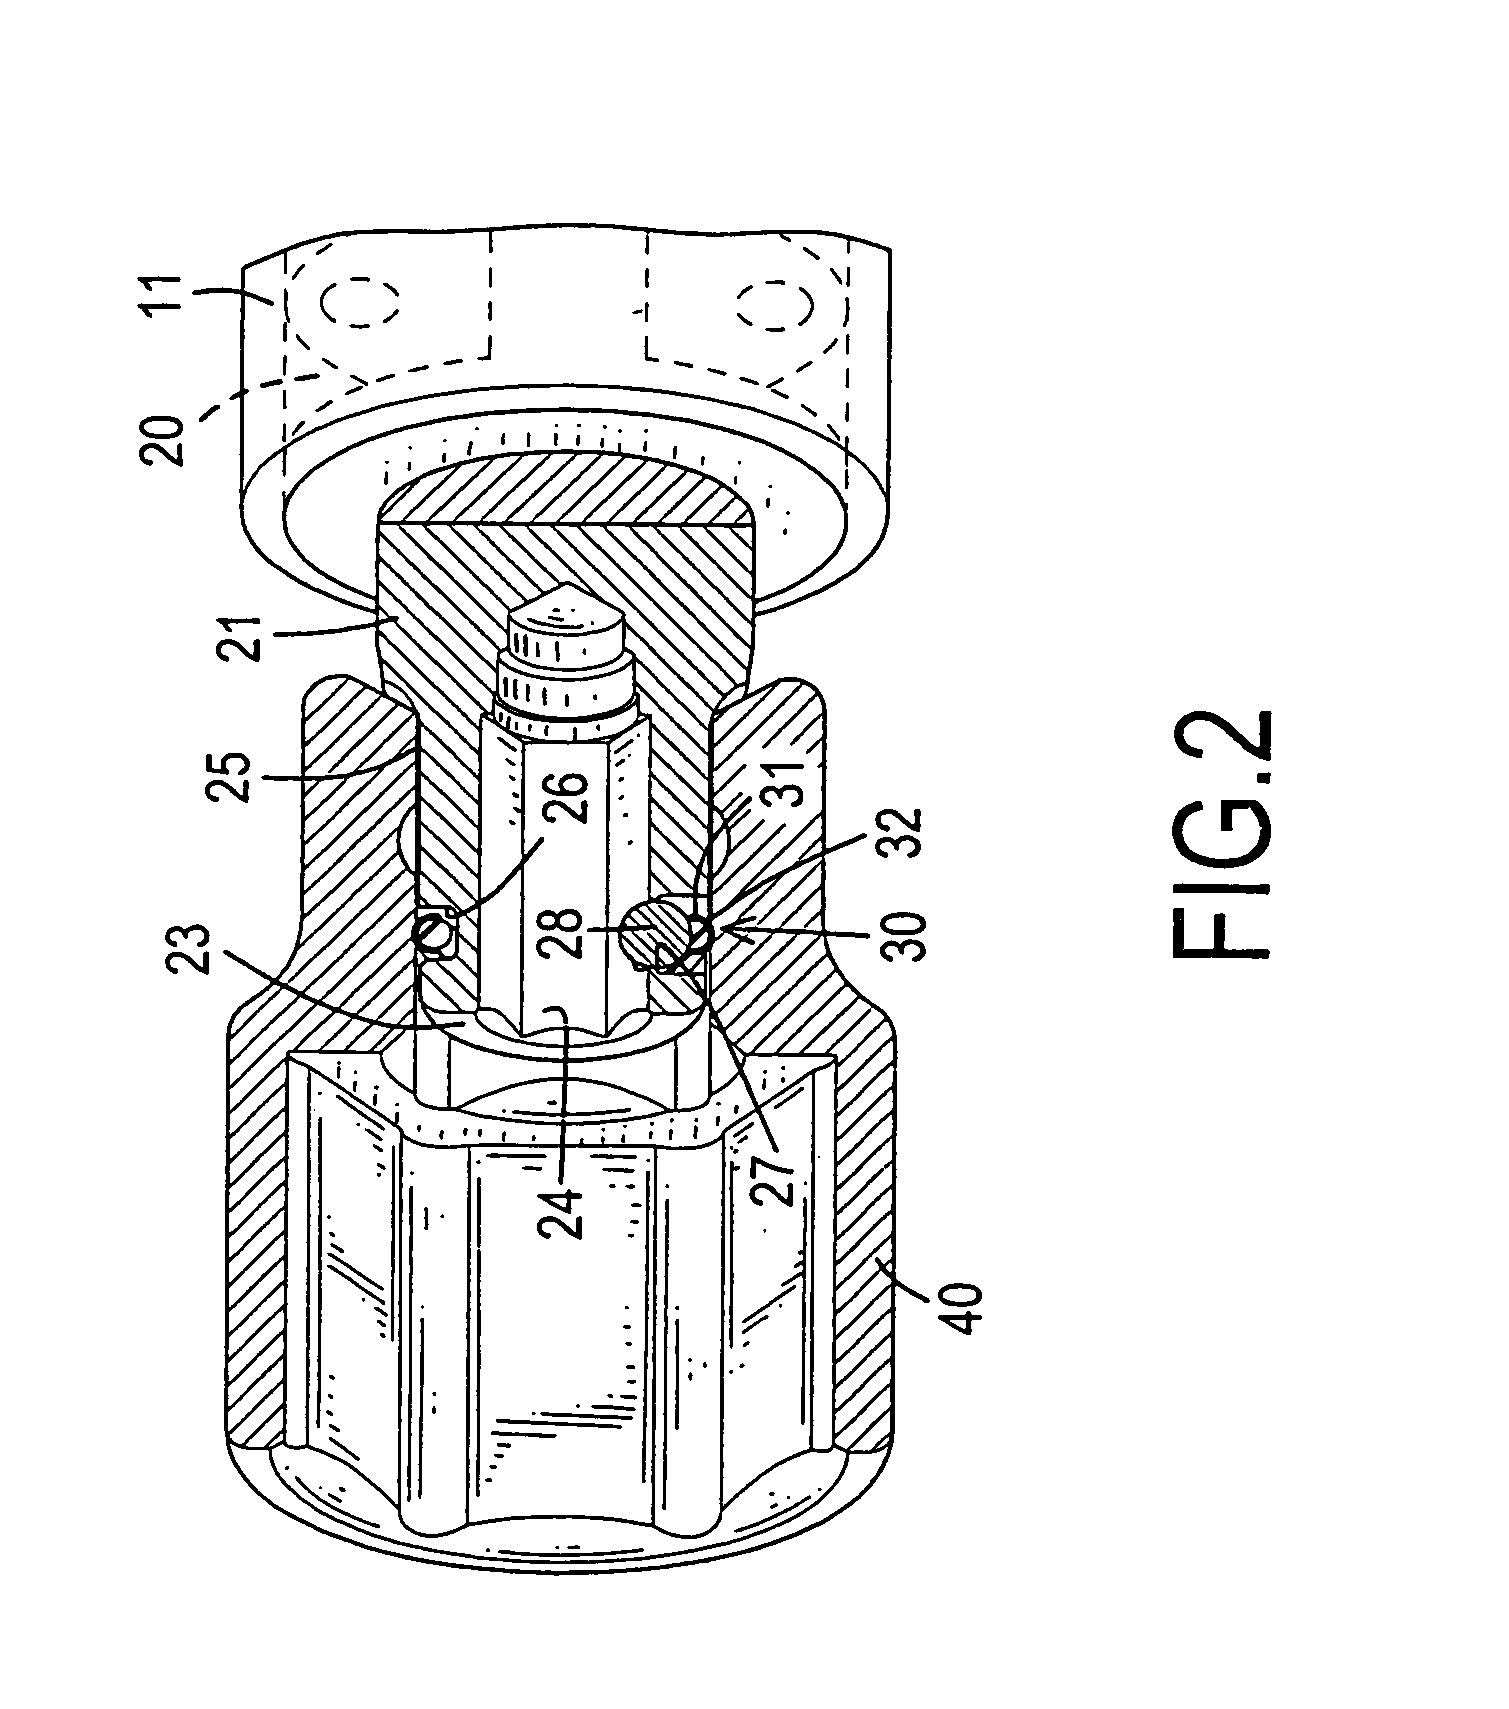 Resilient positioning assembly for an axle in a power tool